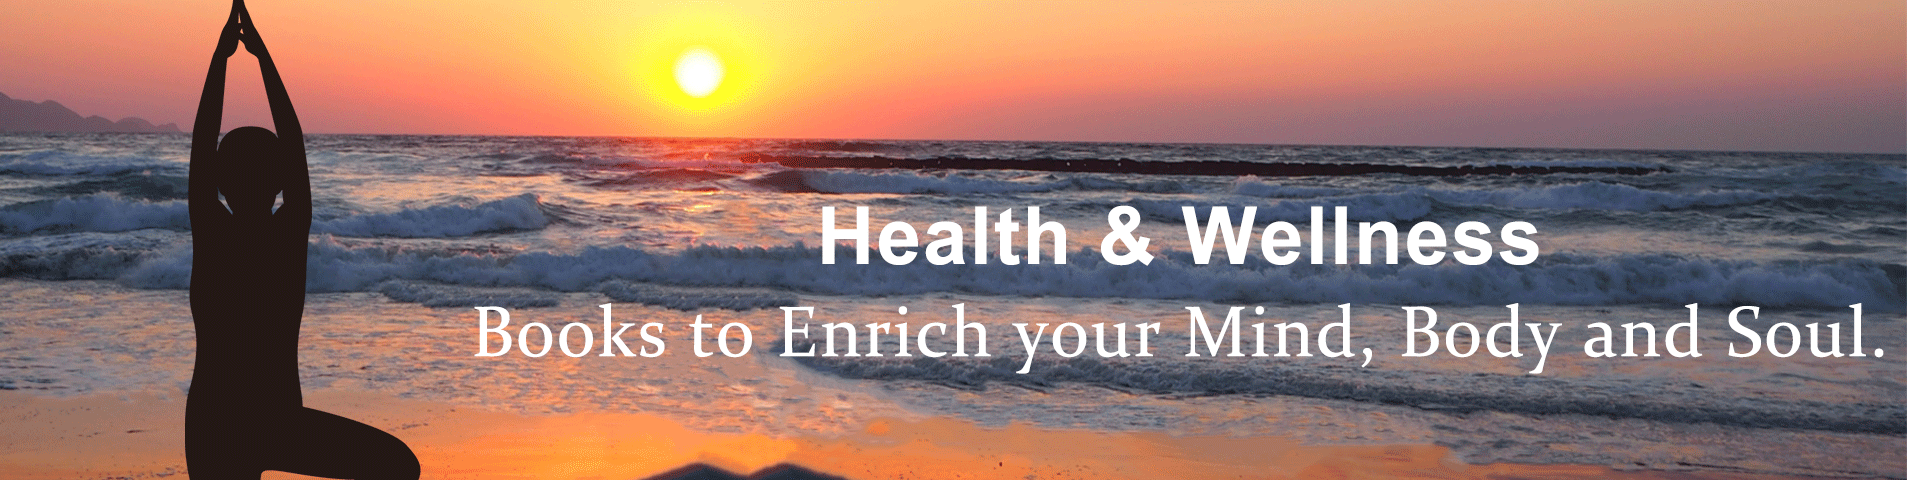 Health ＆ WellnessBooks to Enrich your Mind, Body and Soul.